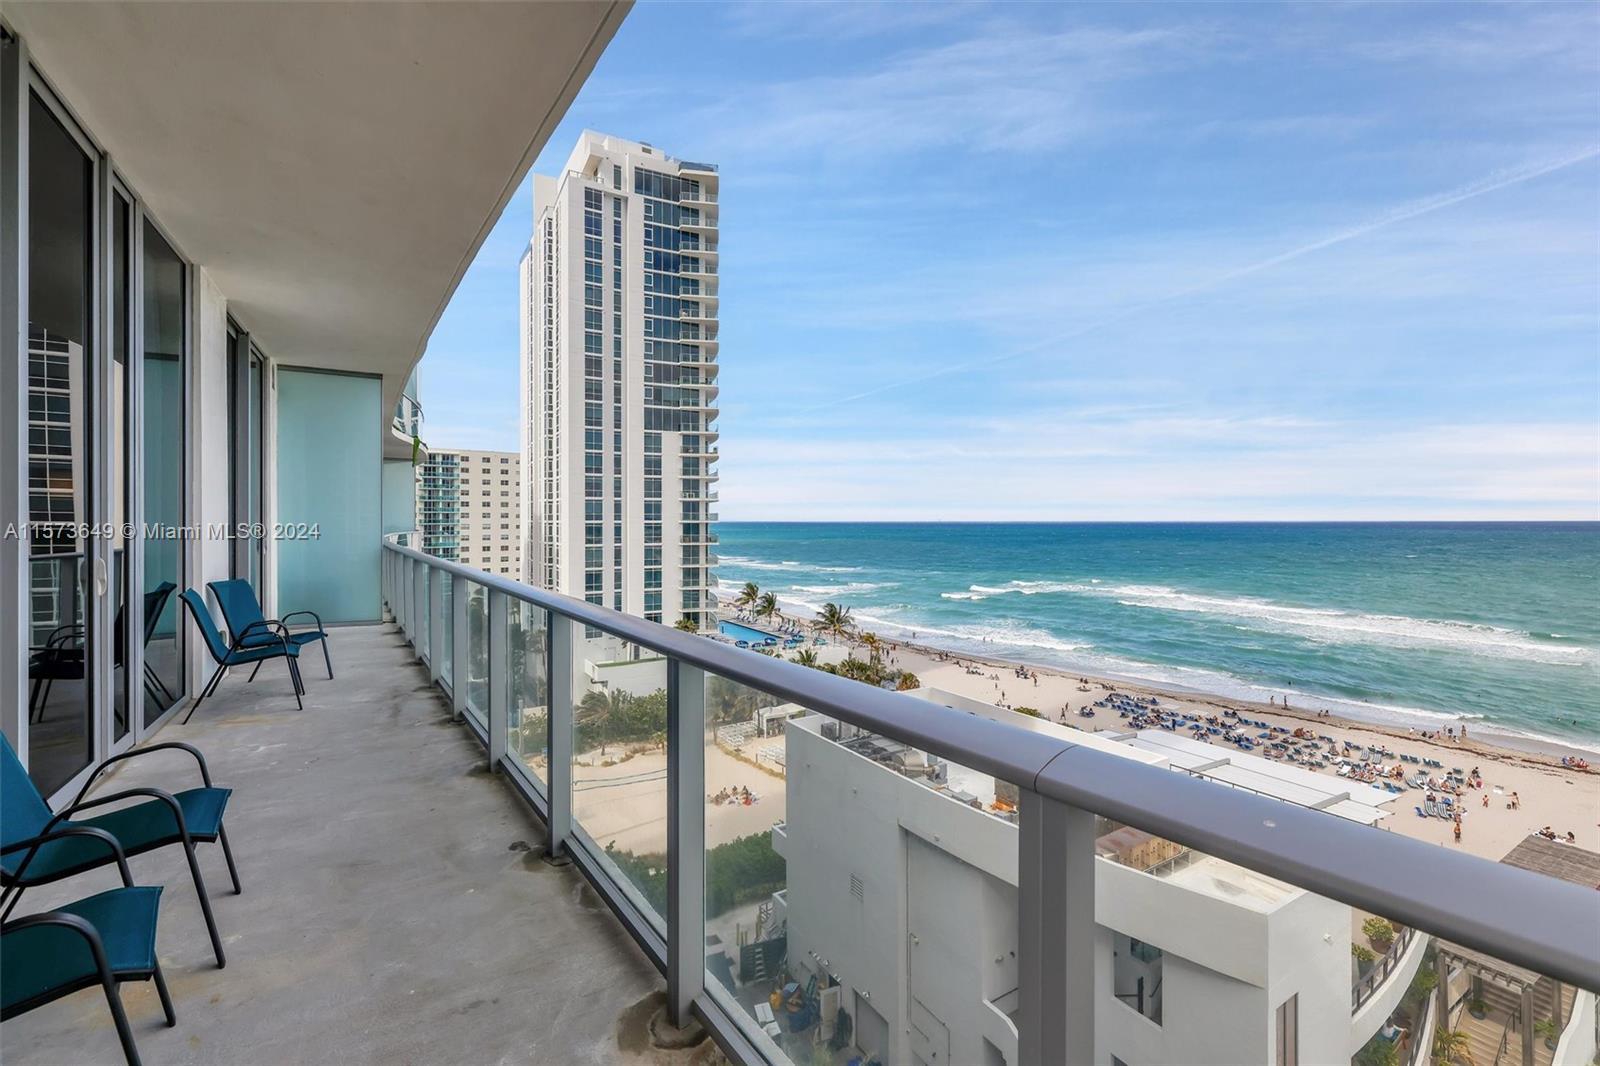 Photo of 4111 S Ocean Dr #705 in Hollywood, FL